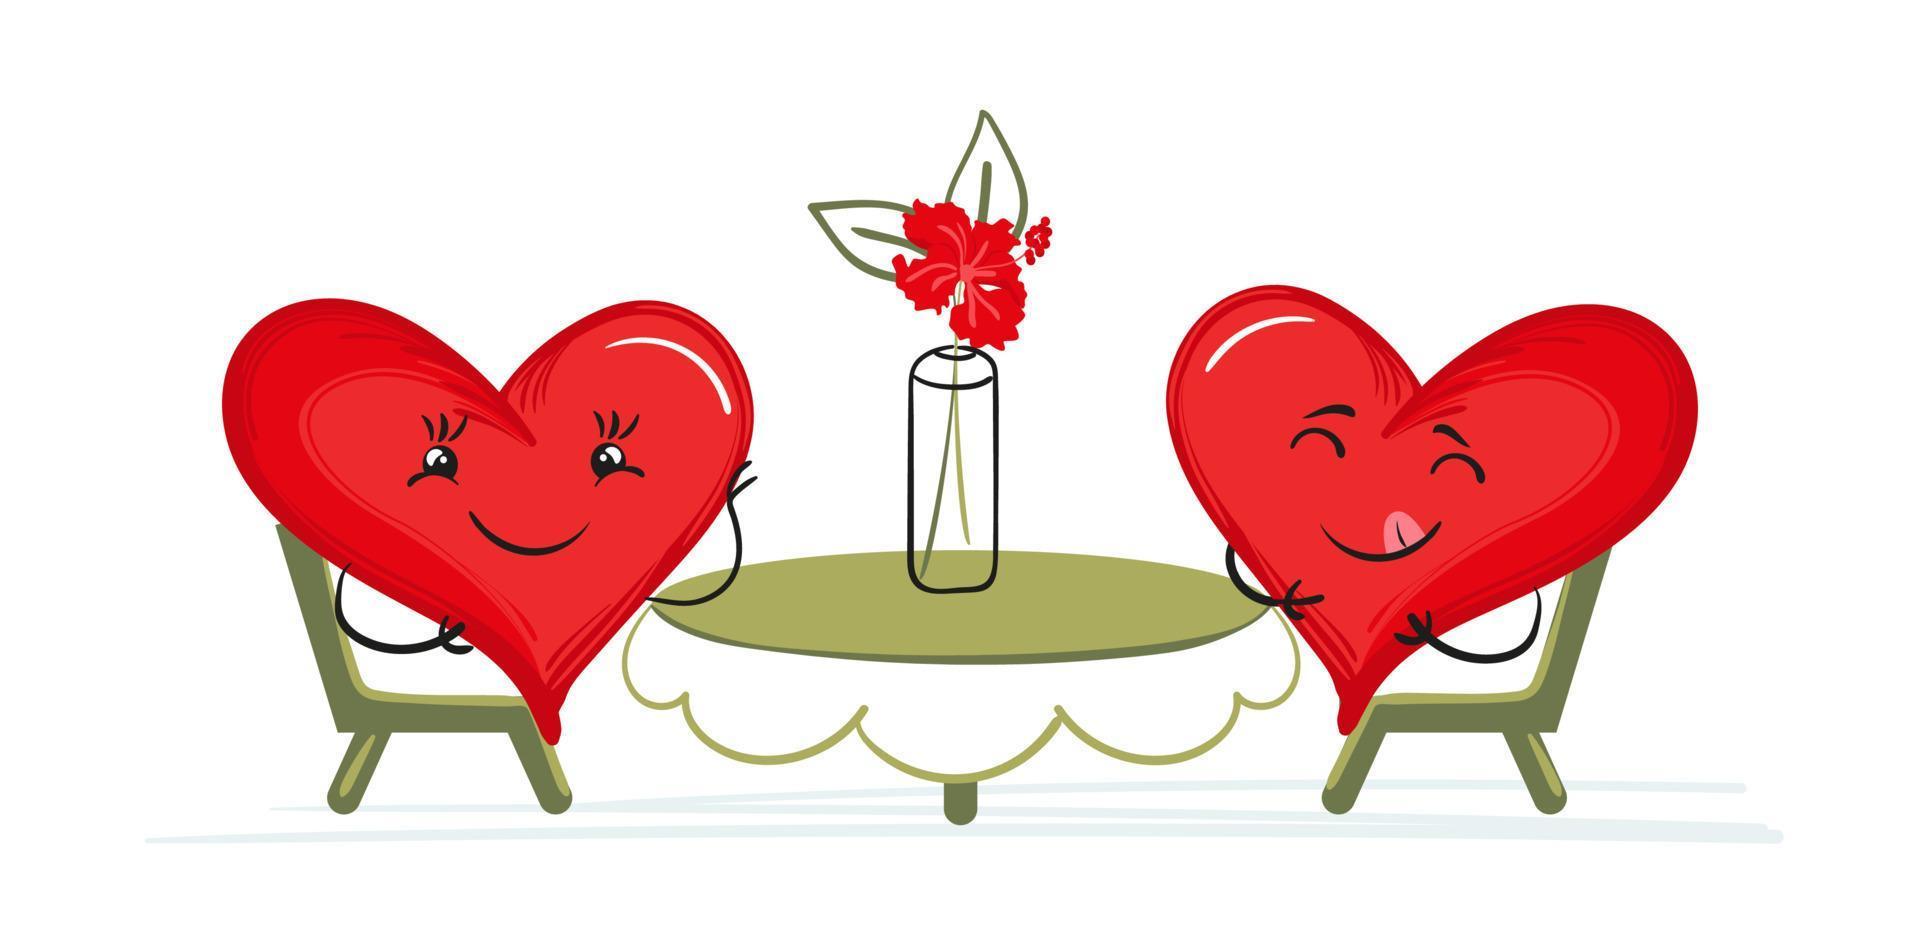 Cute cartoon heart characters at the table on a date. Isolated vector illustration for Valentine's day greeting card or decoration